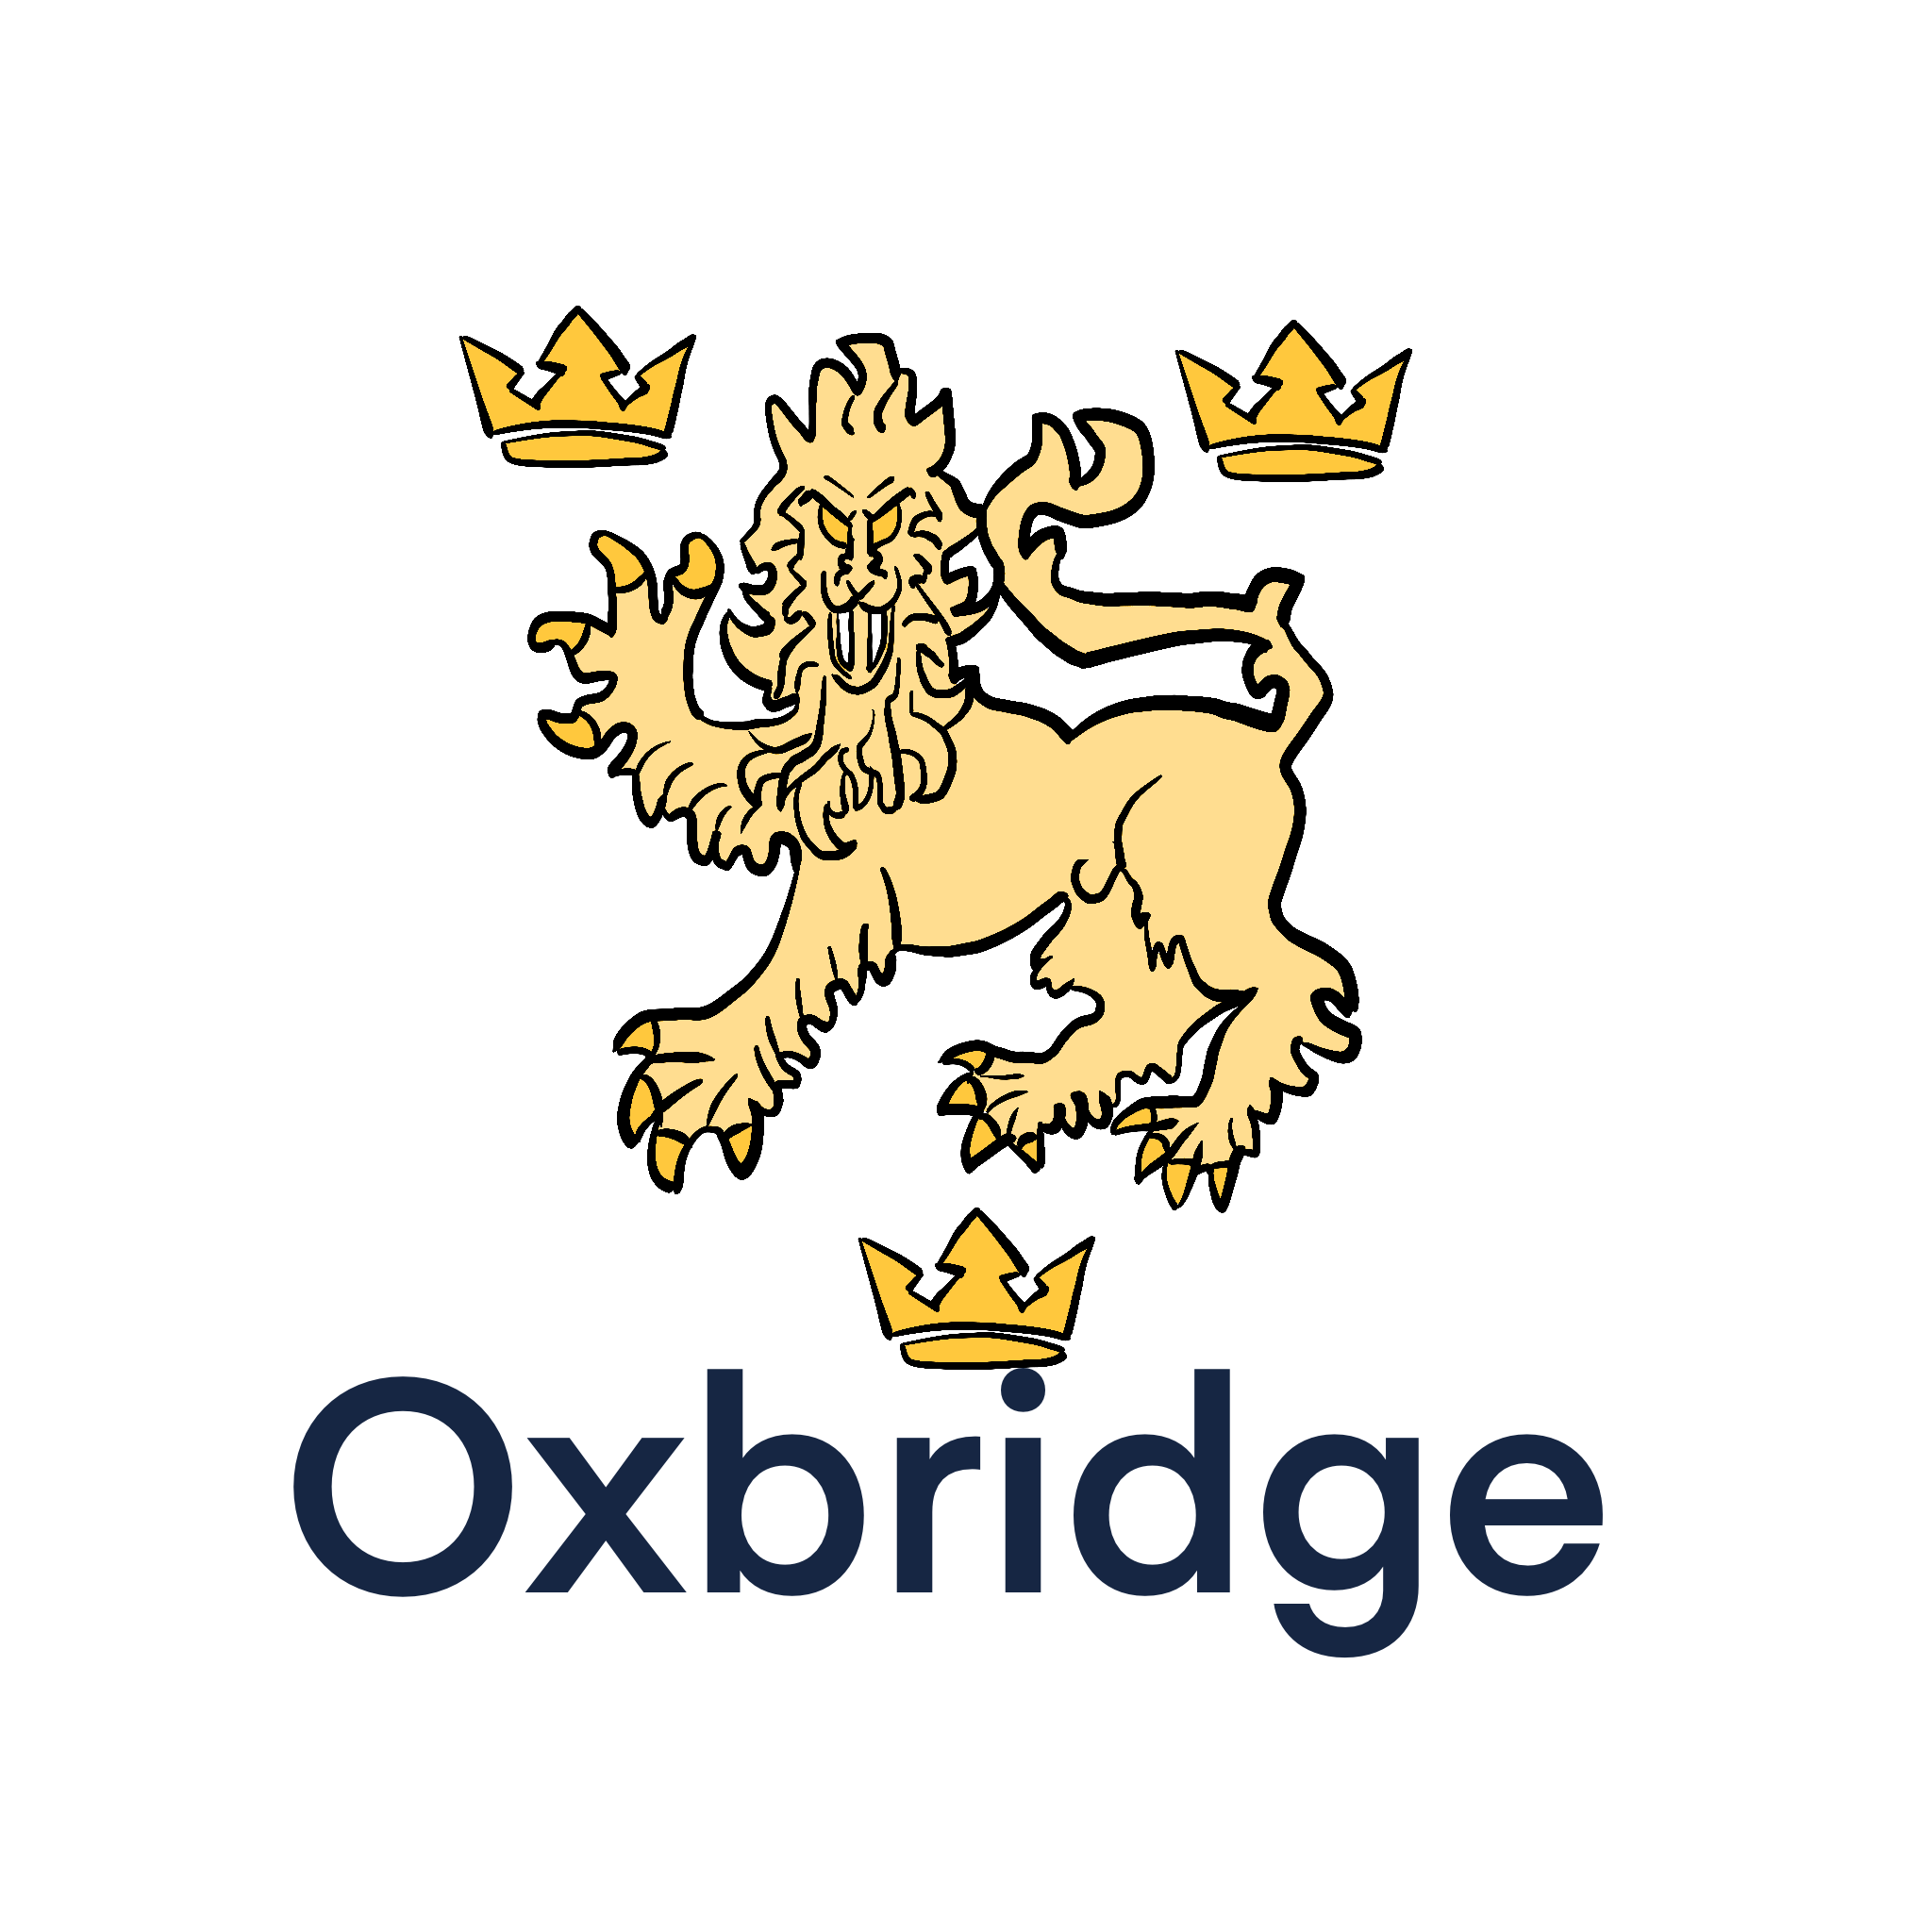 Jacqueline holds a degree from Oxbridge